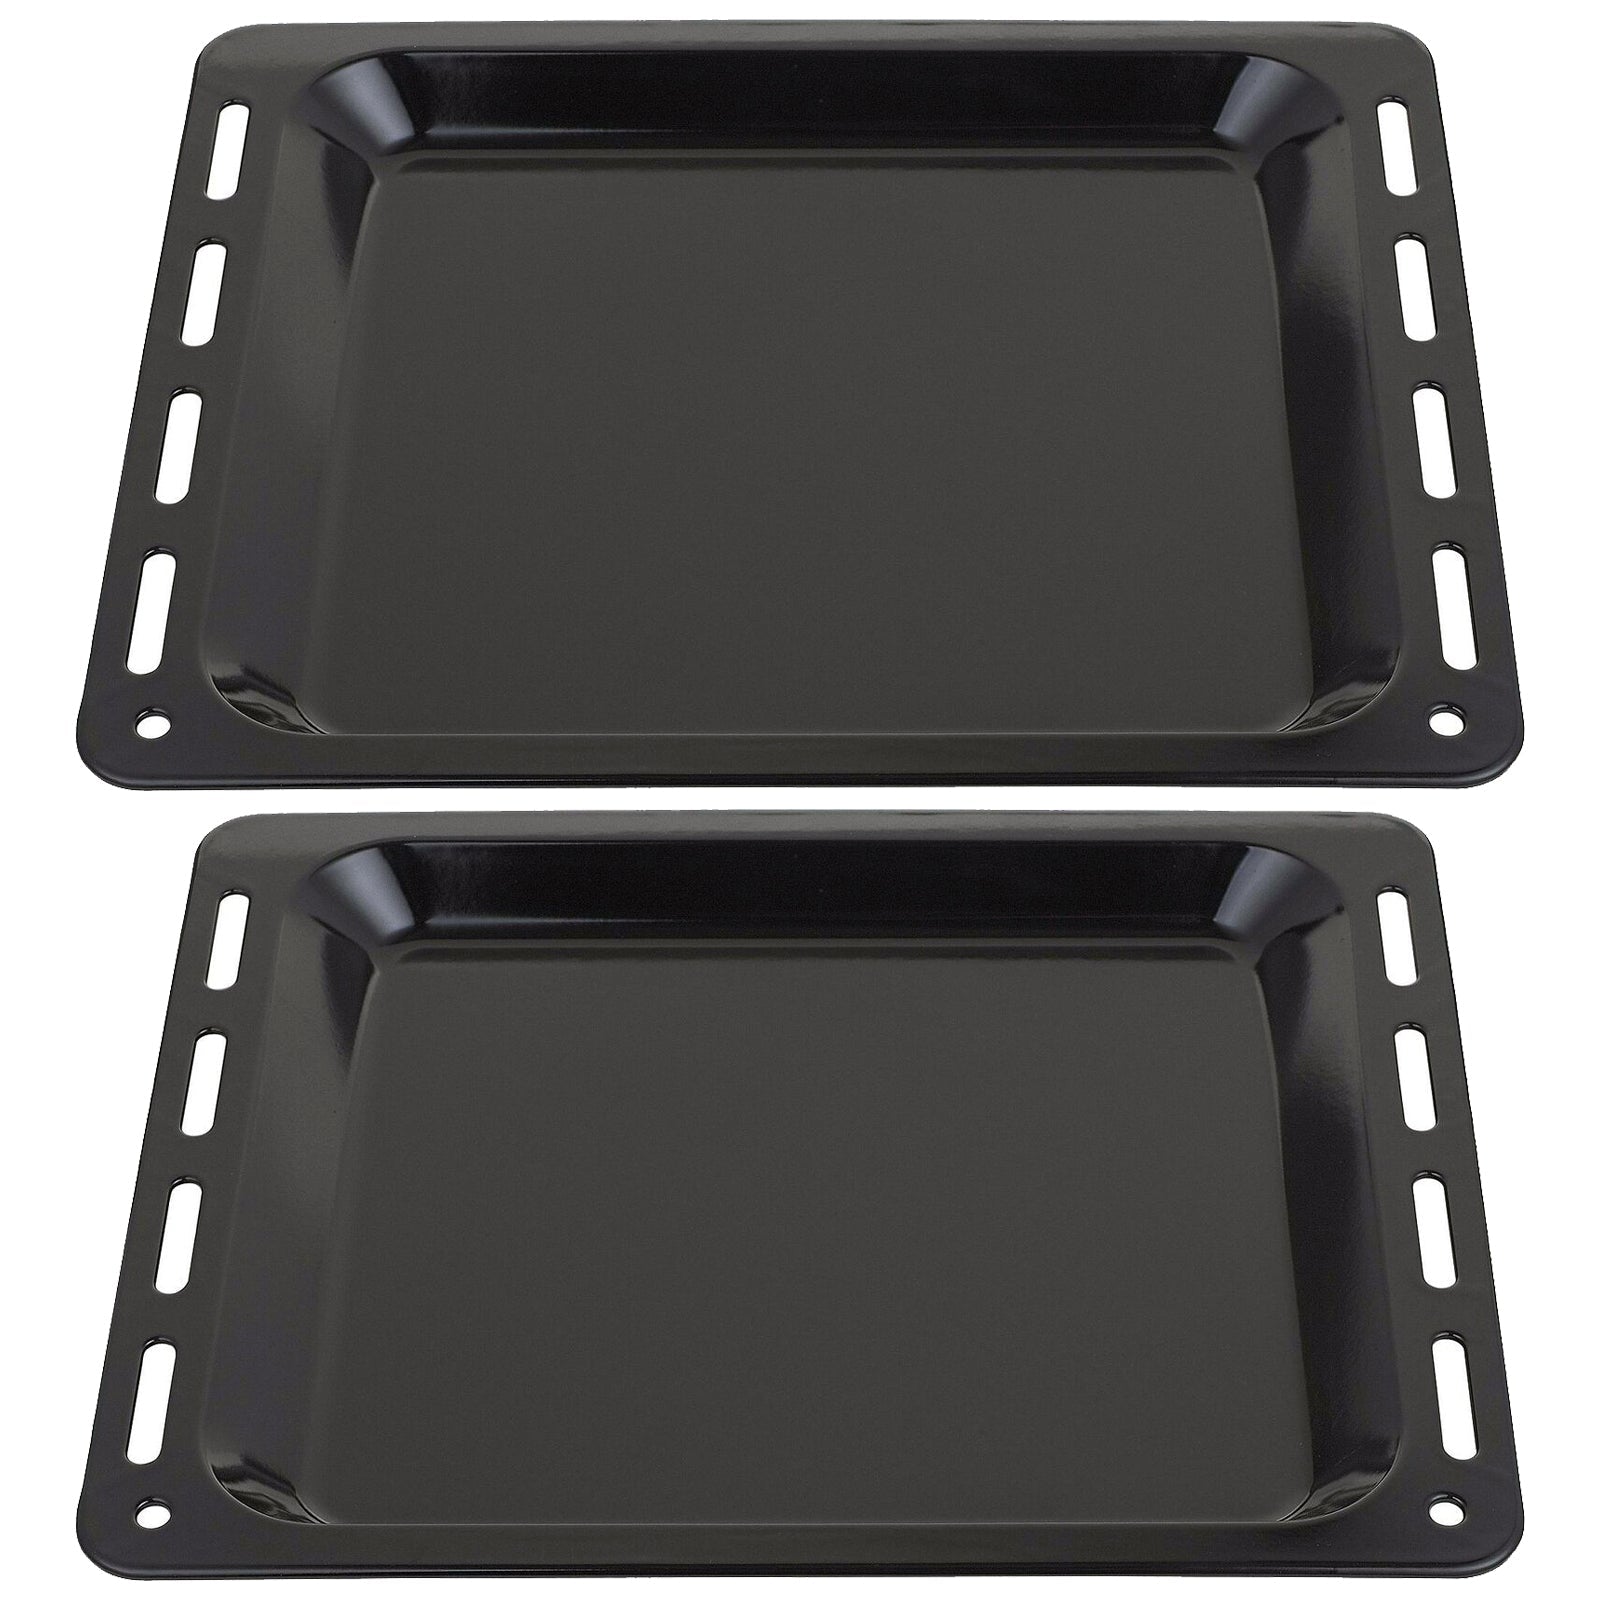 UNIVERSAL Oven Cooker Baking Tray Enamelled Pan (448mm x 360mm x 25mm, Pack of 2)